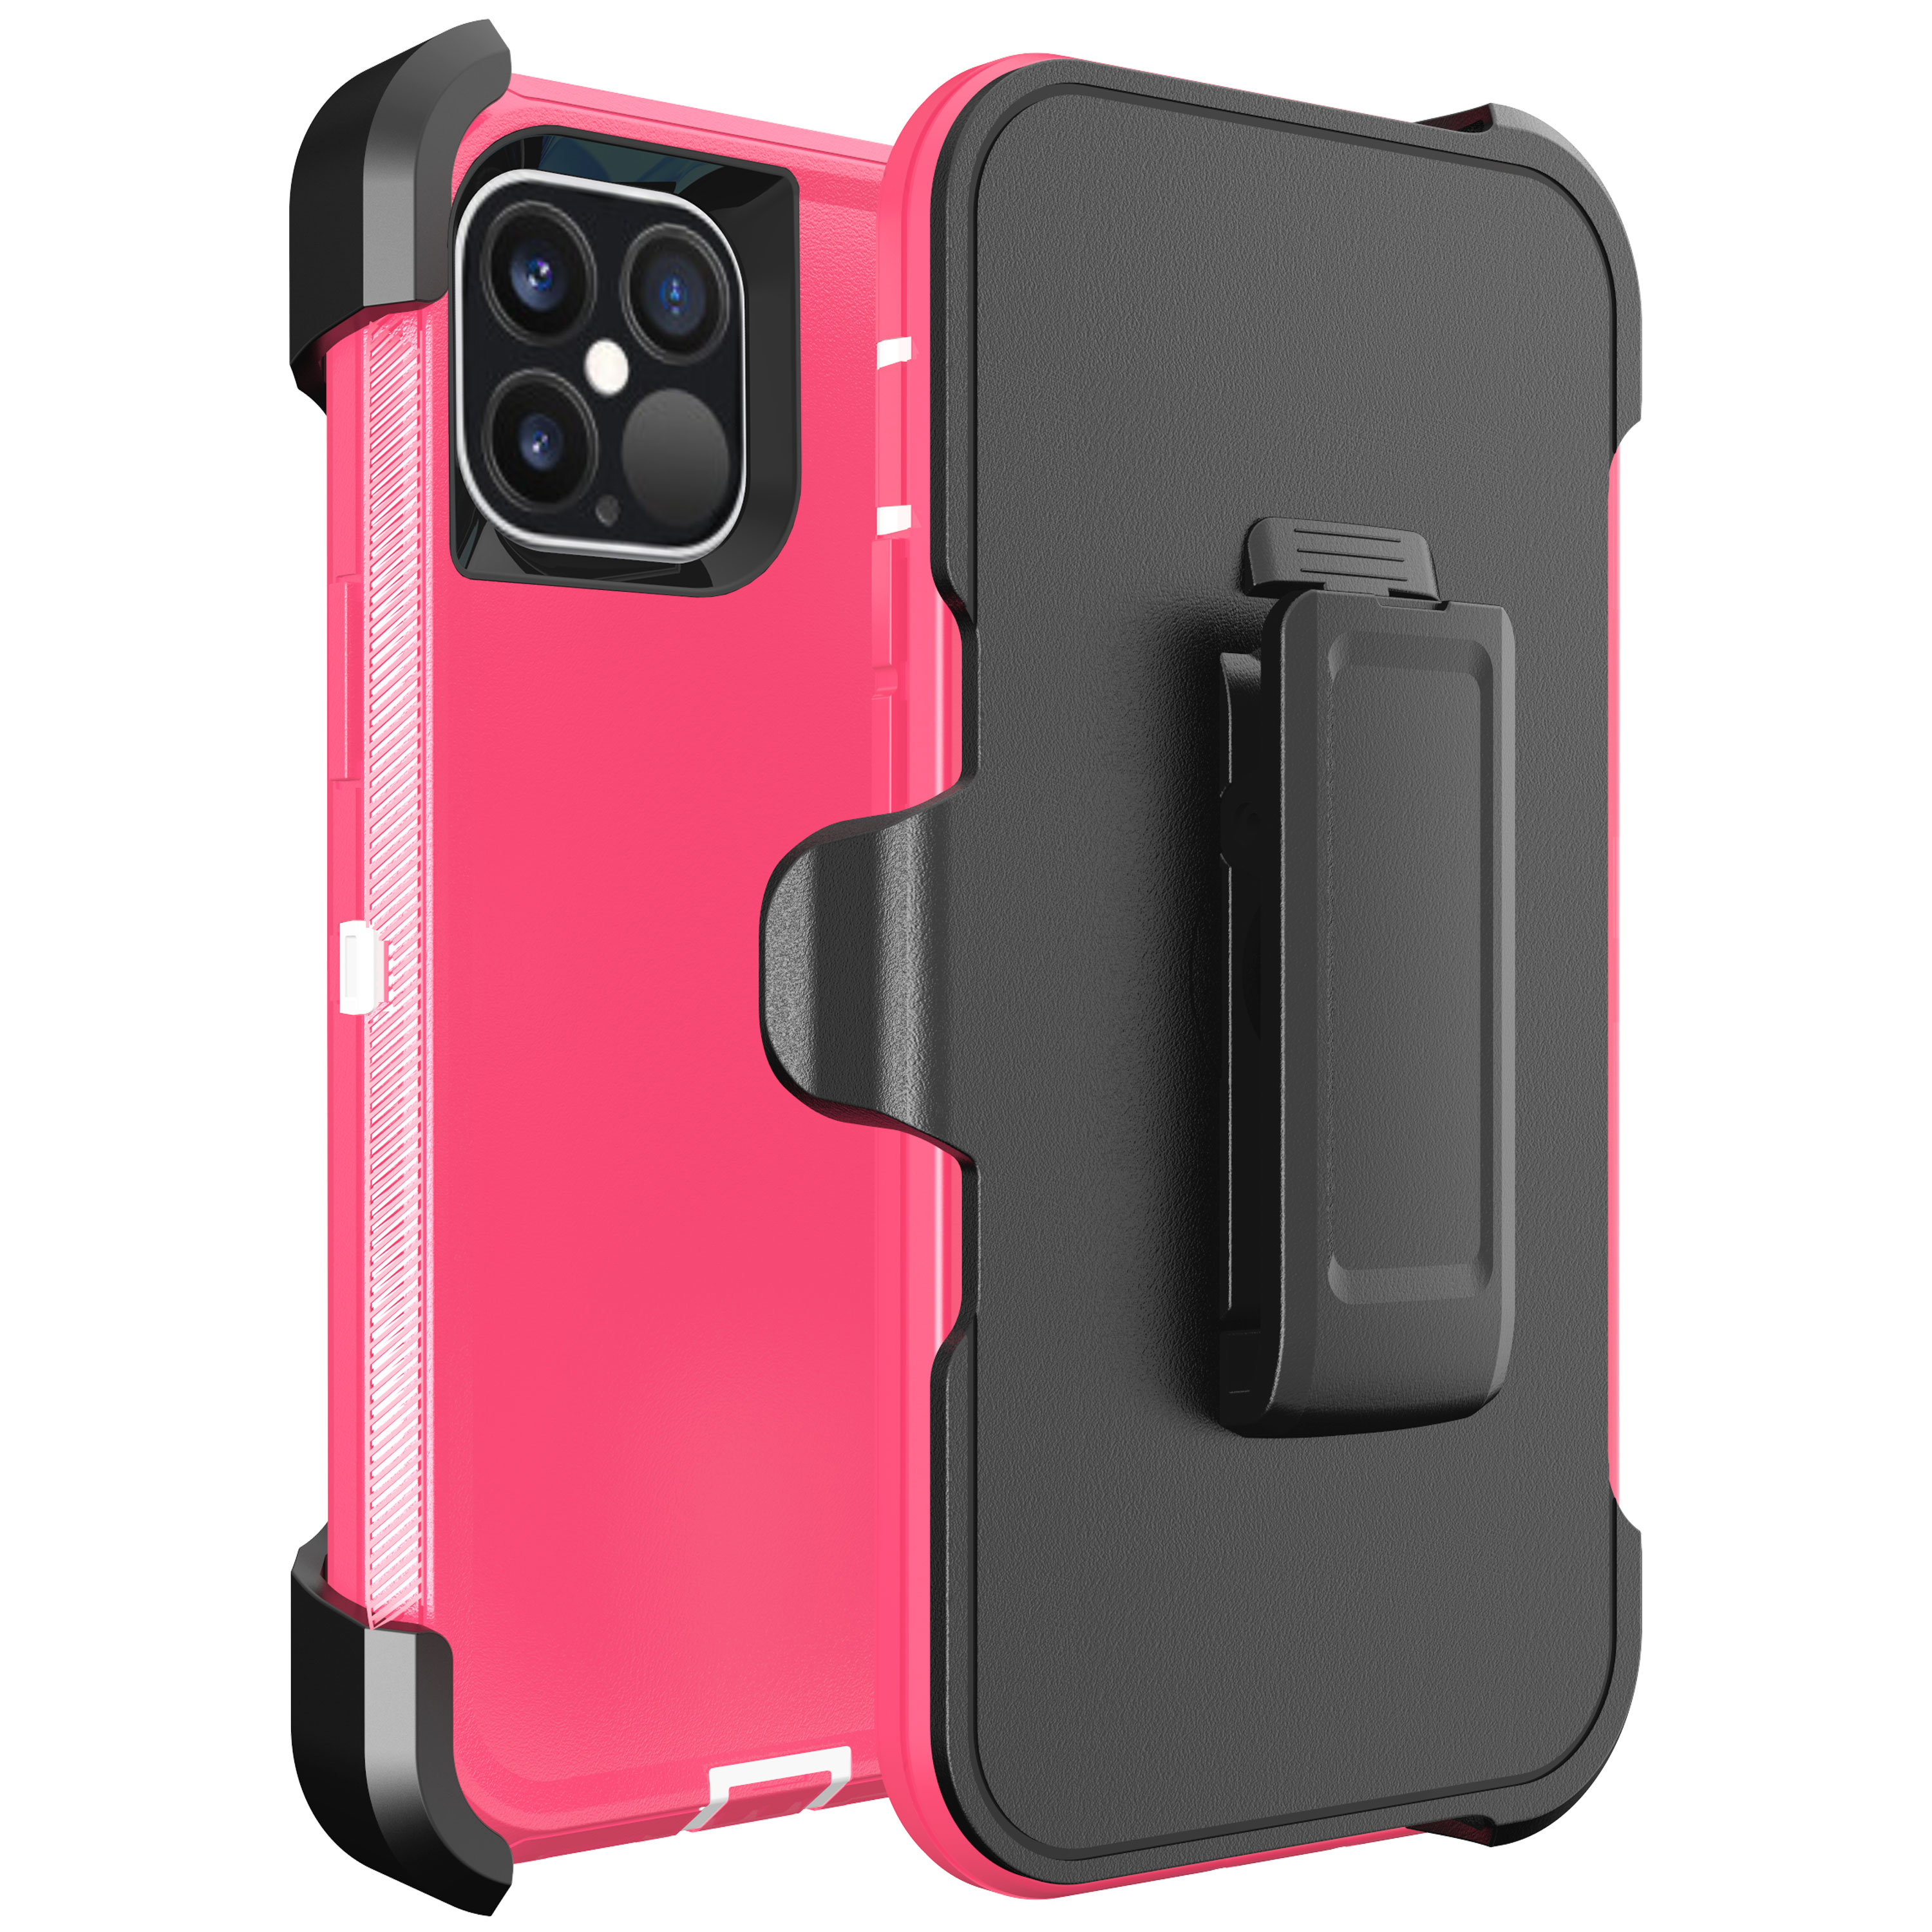 Armor Robot Case With Clip for iPHONE 12 Mini 5.4 (Hot Pink - White)